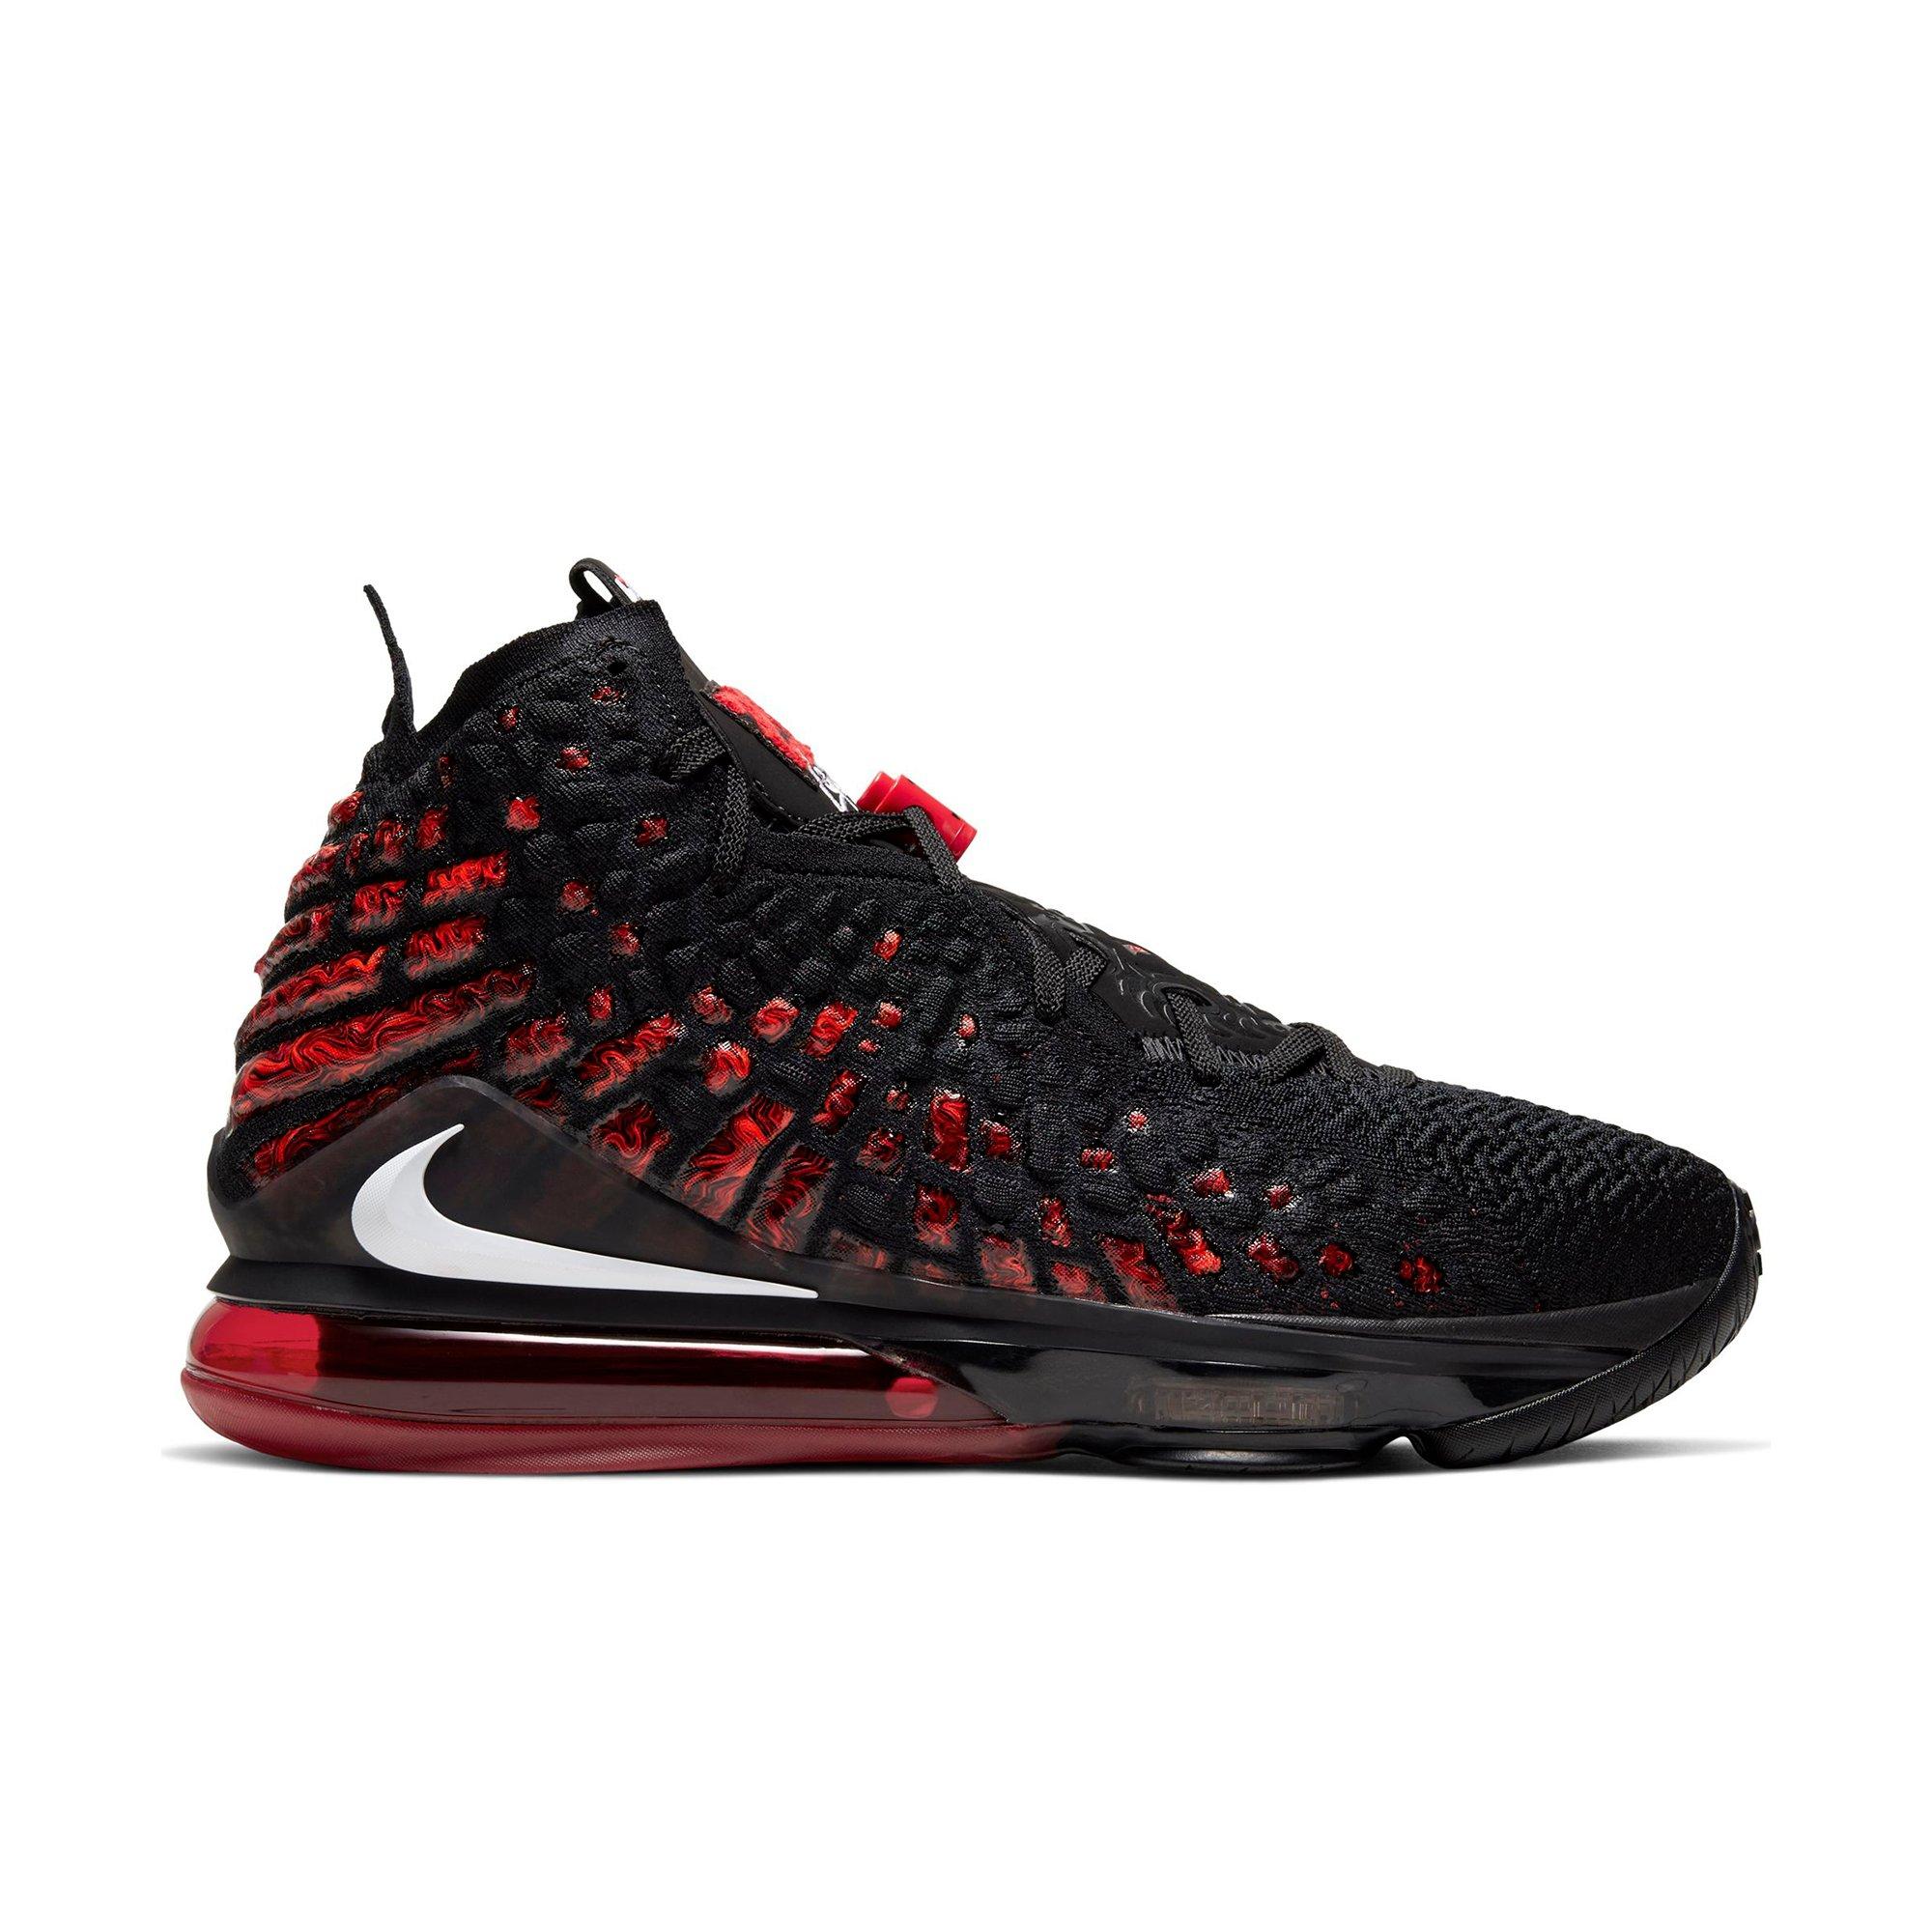 lebron red black shoes